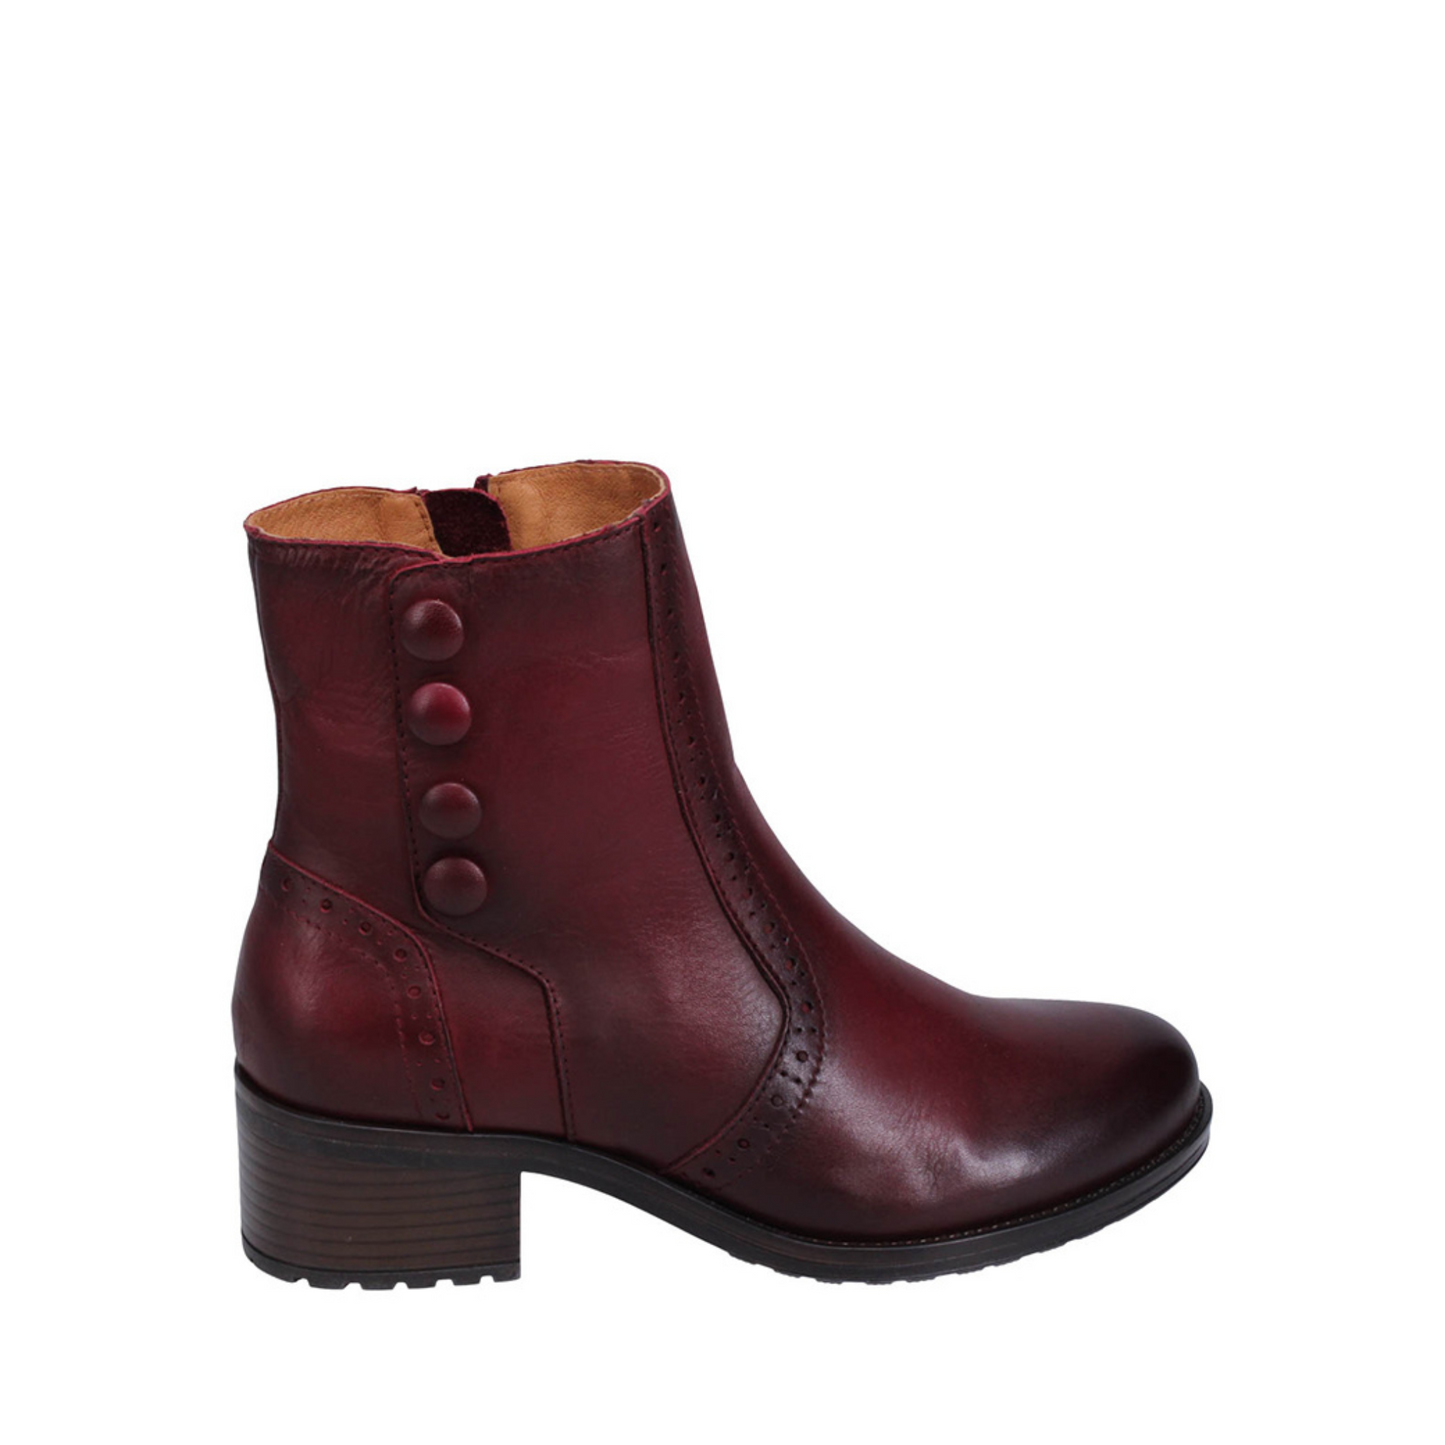 Right side profile of the Miz Mooz Jake Boot in the colour Bordeaux.